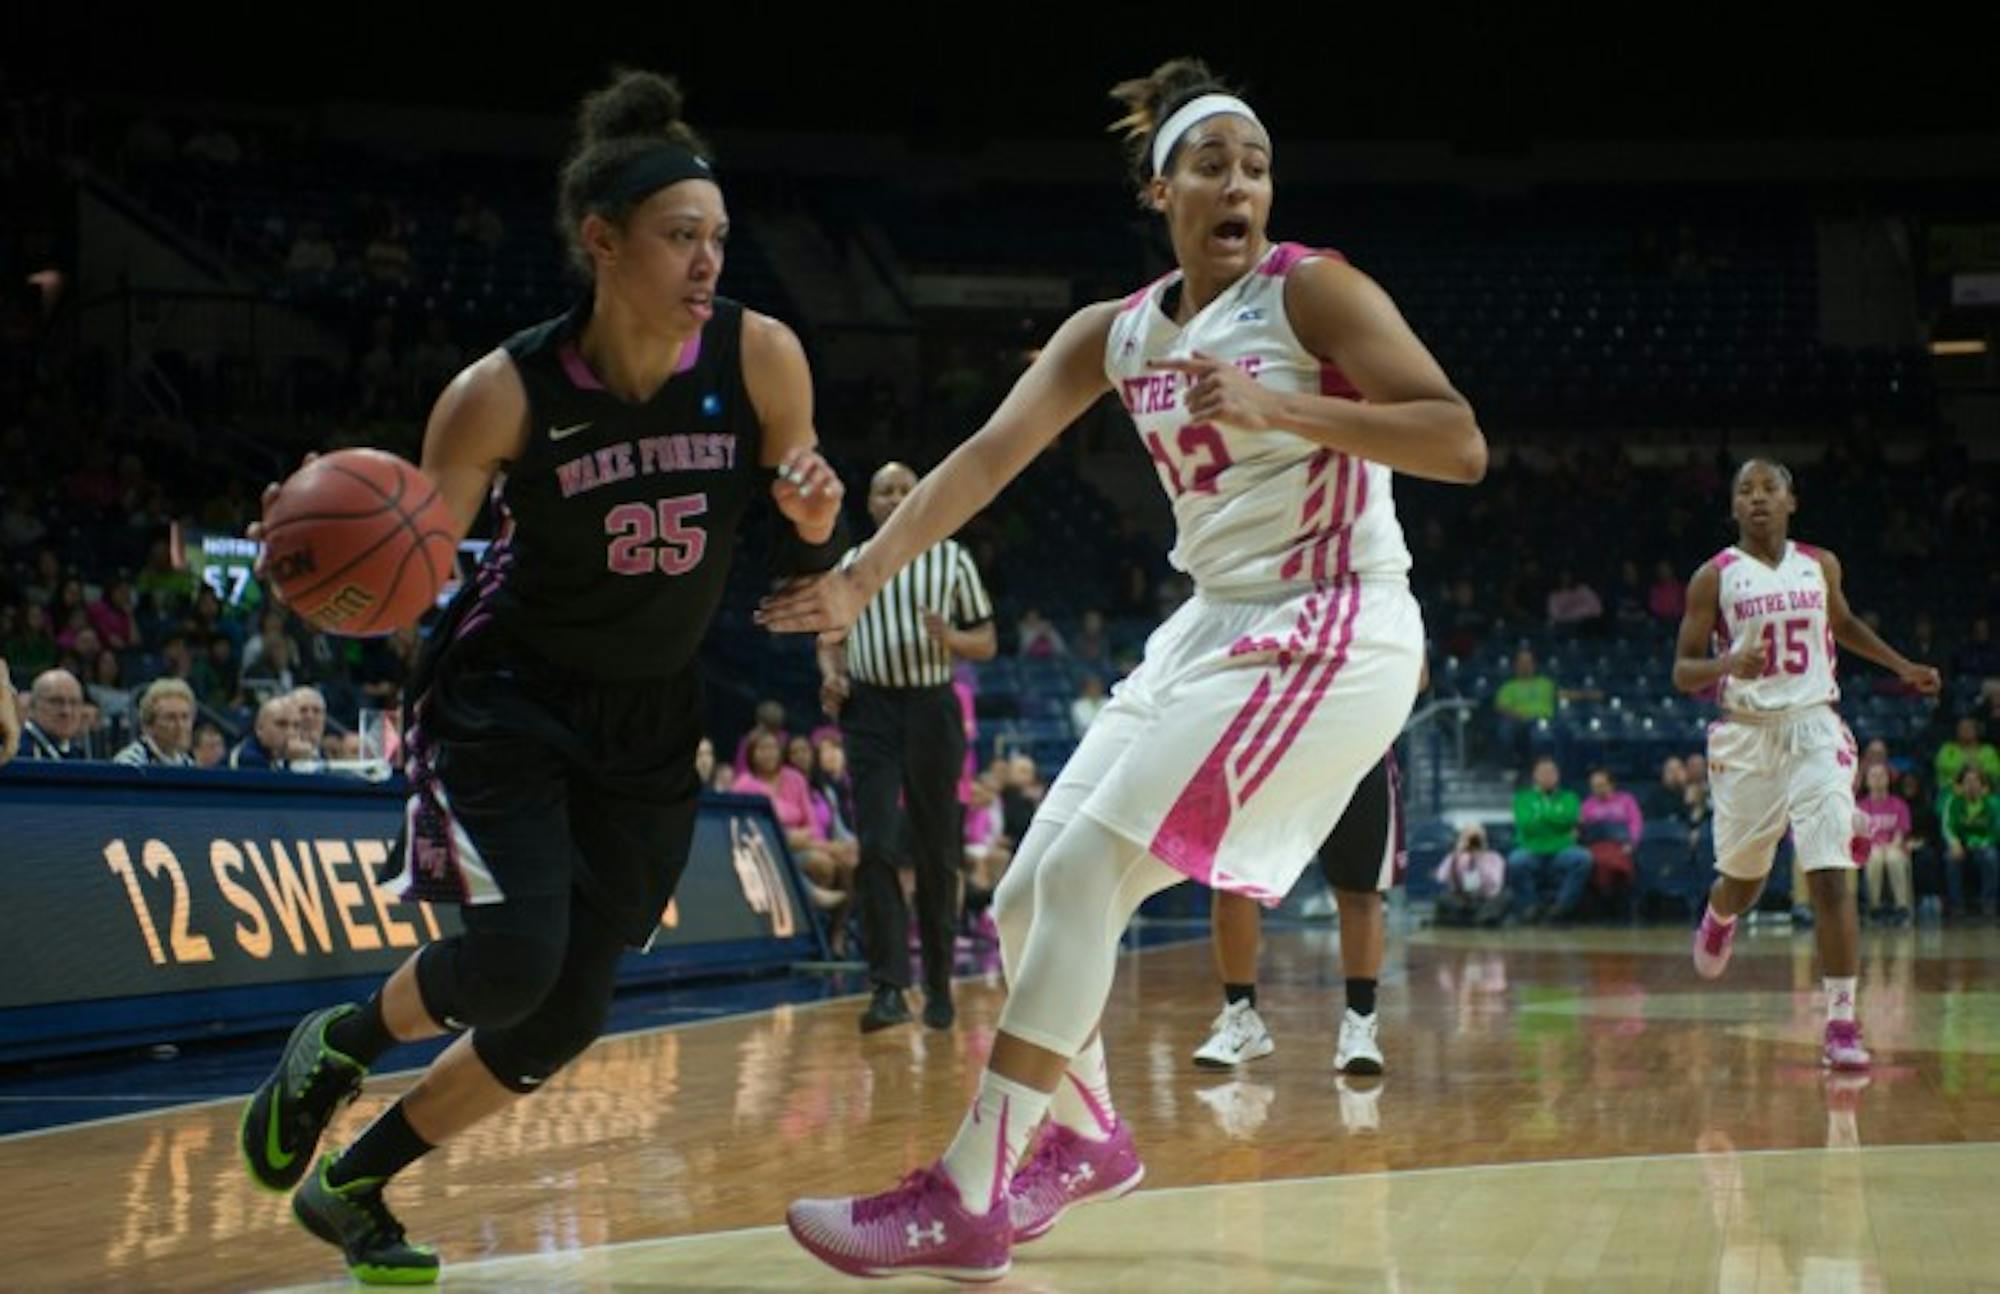 Irish sophomore forward Taya Reimer calls out for help on defense during Notre Dame’s 92-63 win over Wake Forest on Sunday at Purcell Pavilion. Reimer had five boards in the contest.